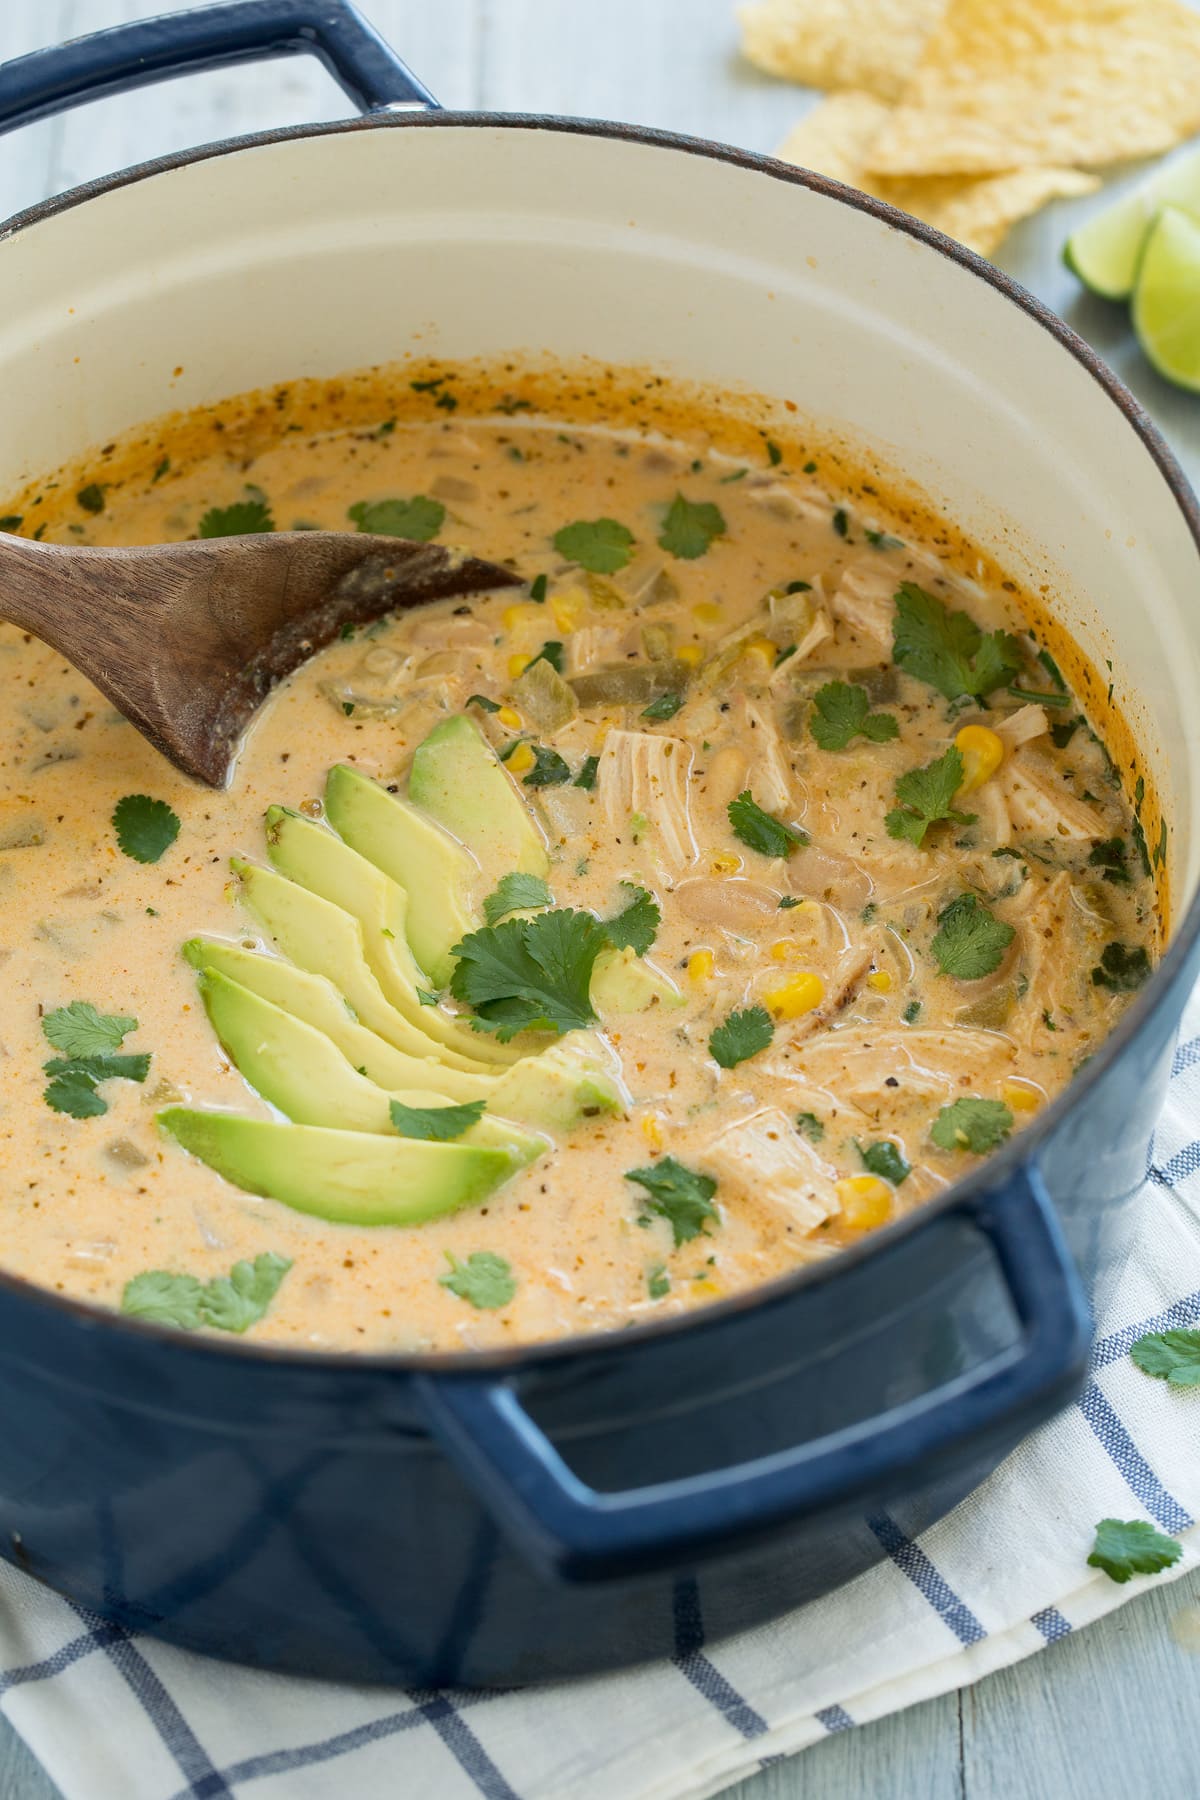 Navy blue pot full of white chicken chili. Chili includes pieces of chicken, pinto beans, corn, green chilies and a creamy broth, it is garnished with avocado and cilantro.